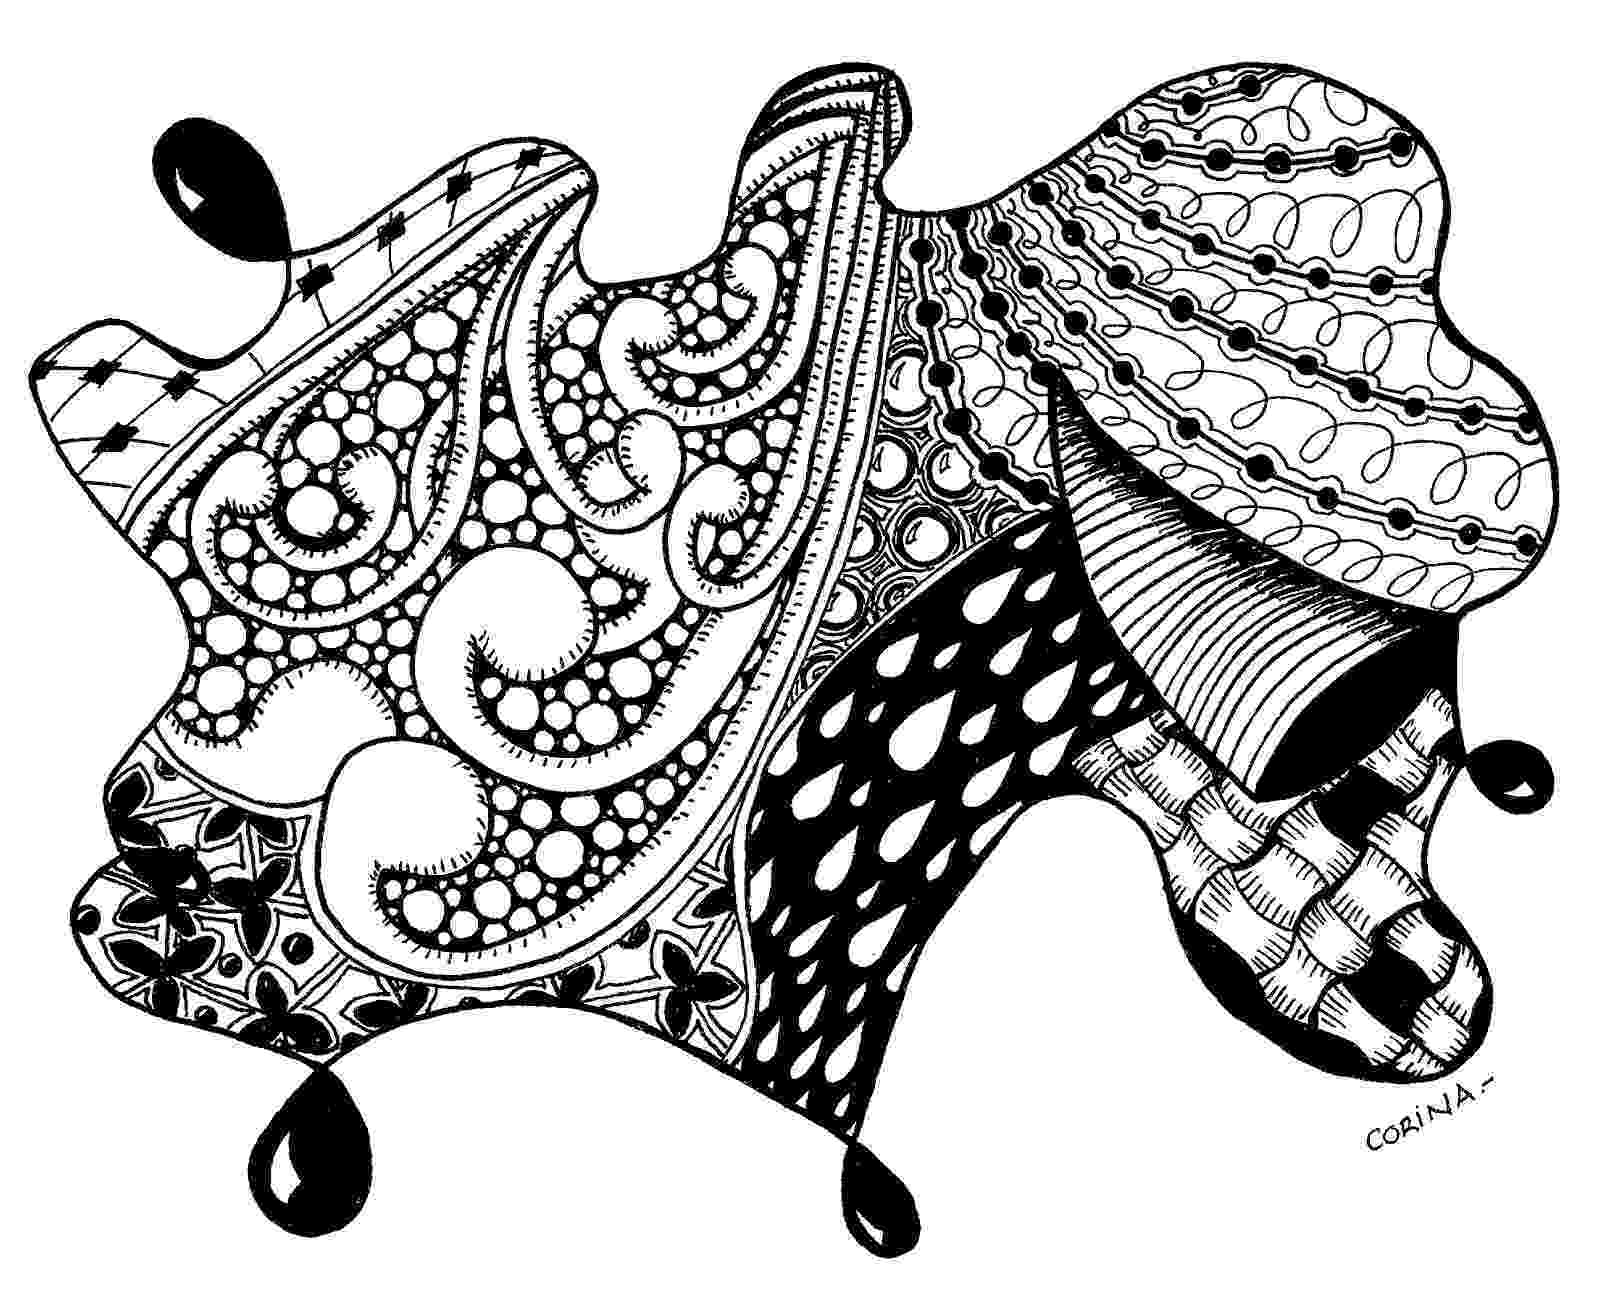 color zentangle corina39s art blog facebook fan page first giveaway a color zentangle 